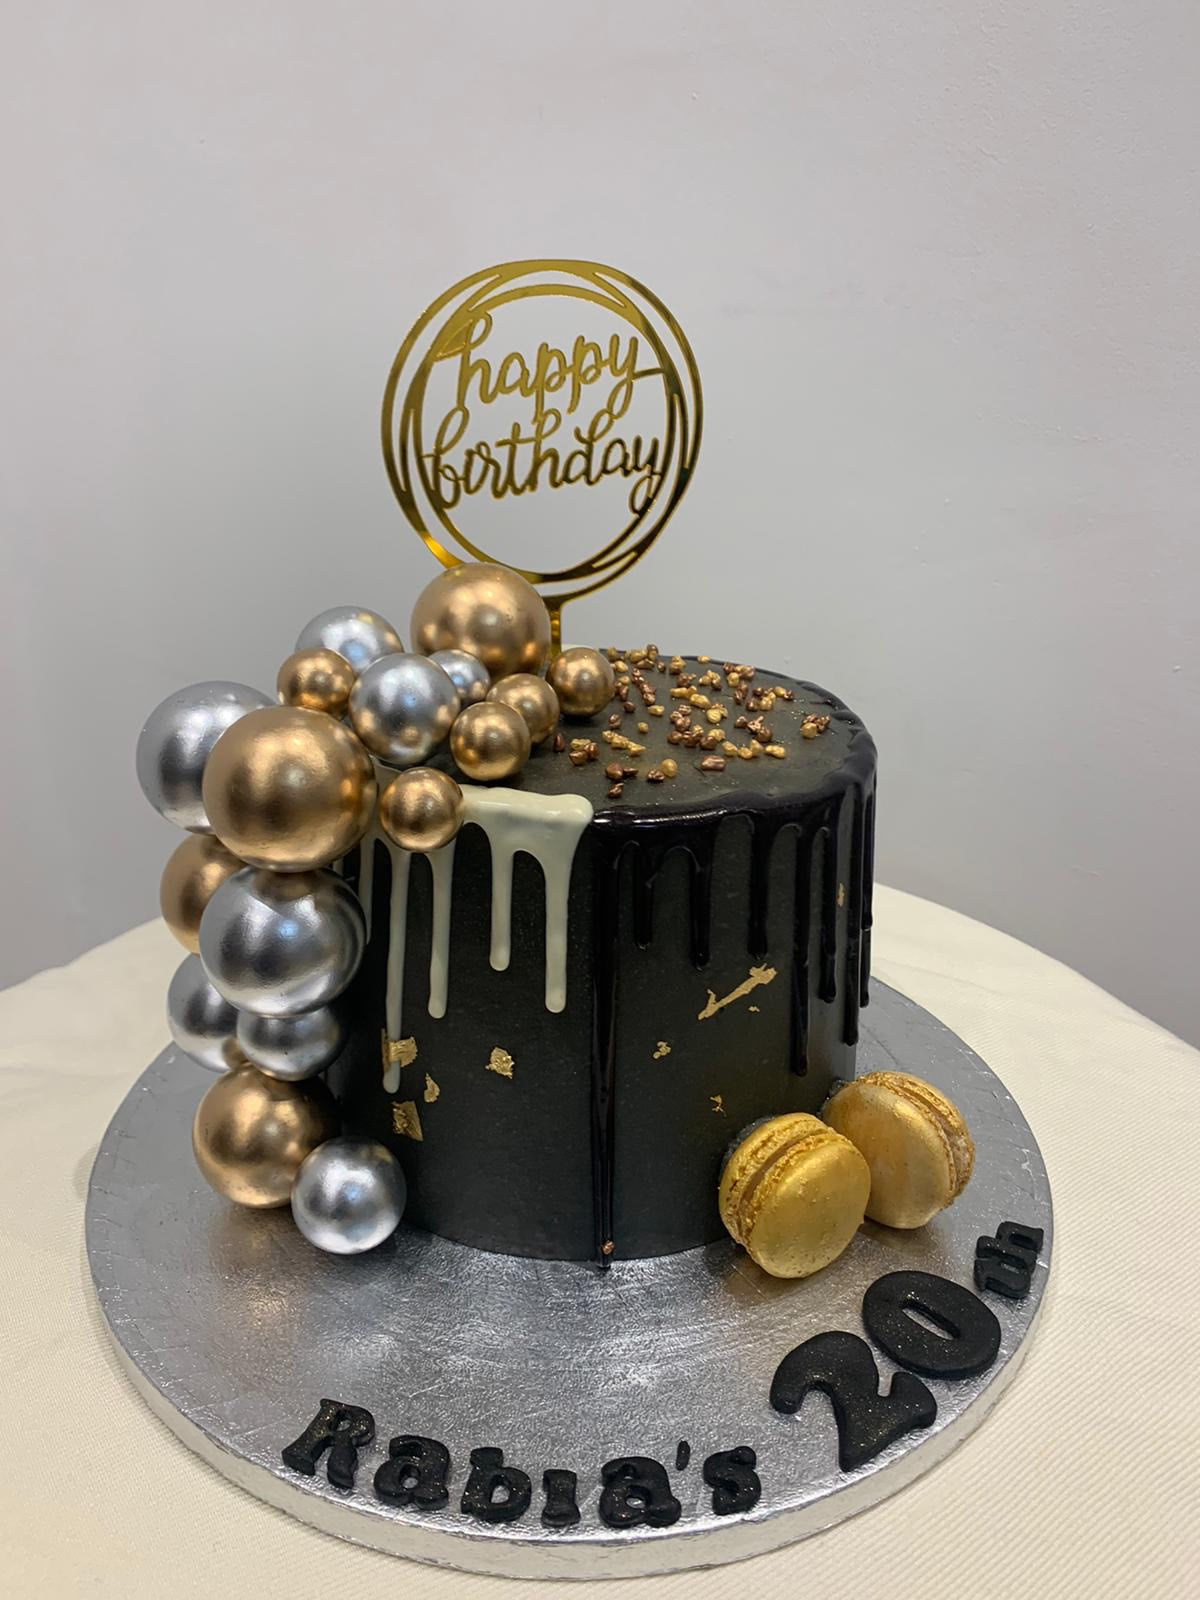 A chocolate cake decorated with silver balls and a candle - Stock Photo -  Dissolve